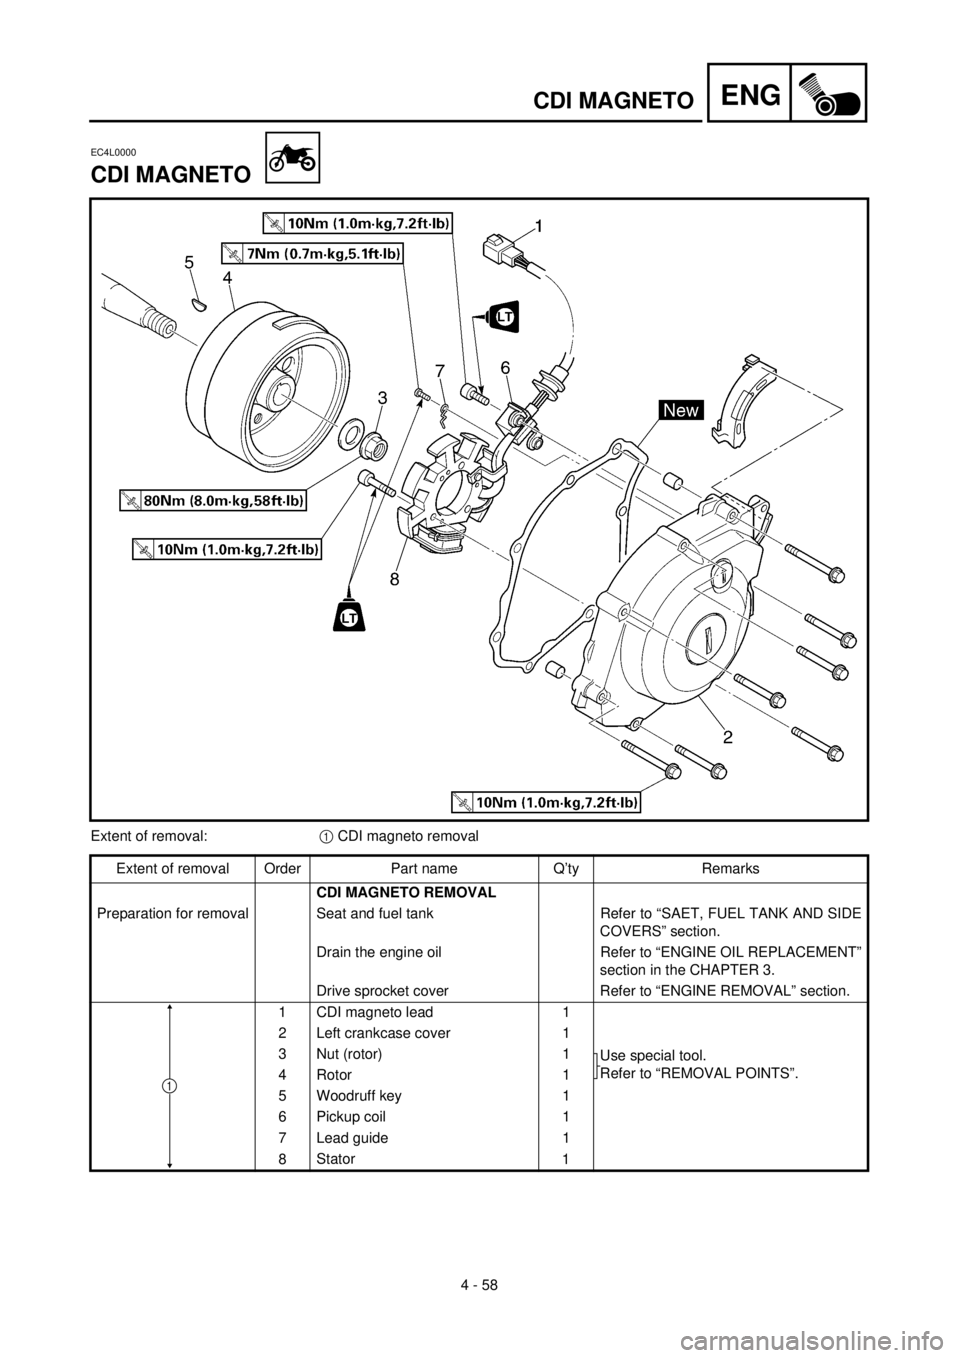 YAMAHA TTR125 2002  Owners Manual 4 - 58
ENGCDI MAGNETO
EC4L0000
CDI MAGNETO
Extent of removal:1 CDI magneto removal
Extent of removal Order Part name Q’ty Remarks
CDI MAGNETO REMOVAL 
Preparation for removal Seat and fuel tank Refe